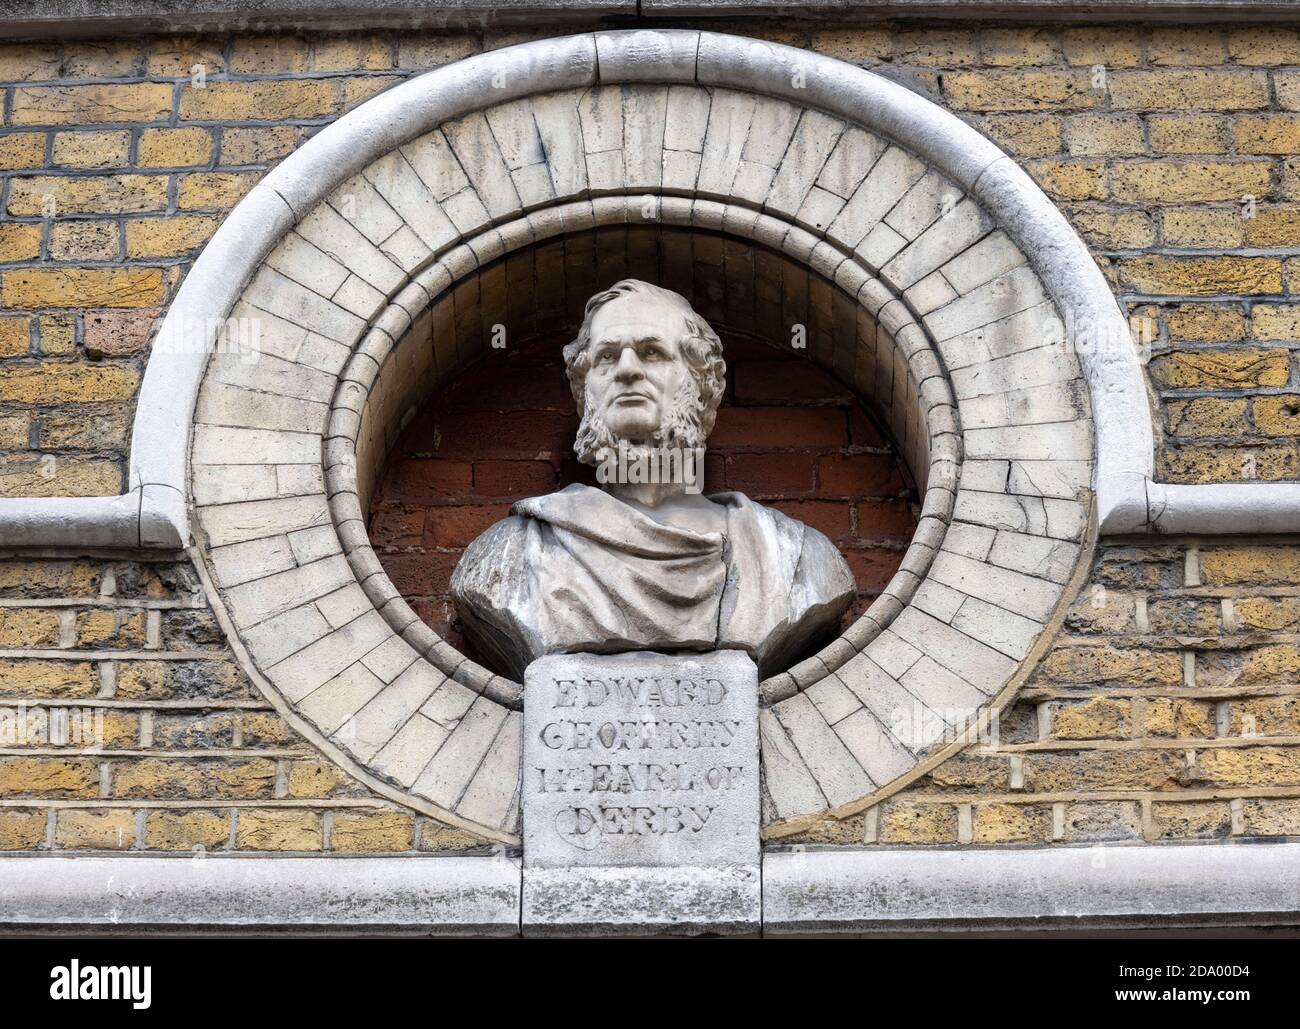 Sculpture of Edward Geoffrey 14th Earl of Derby on the façade at 22 Great Windmill Street, London,, England, UK Stock Photo